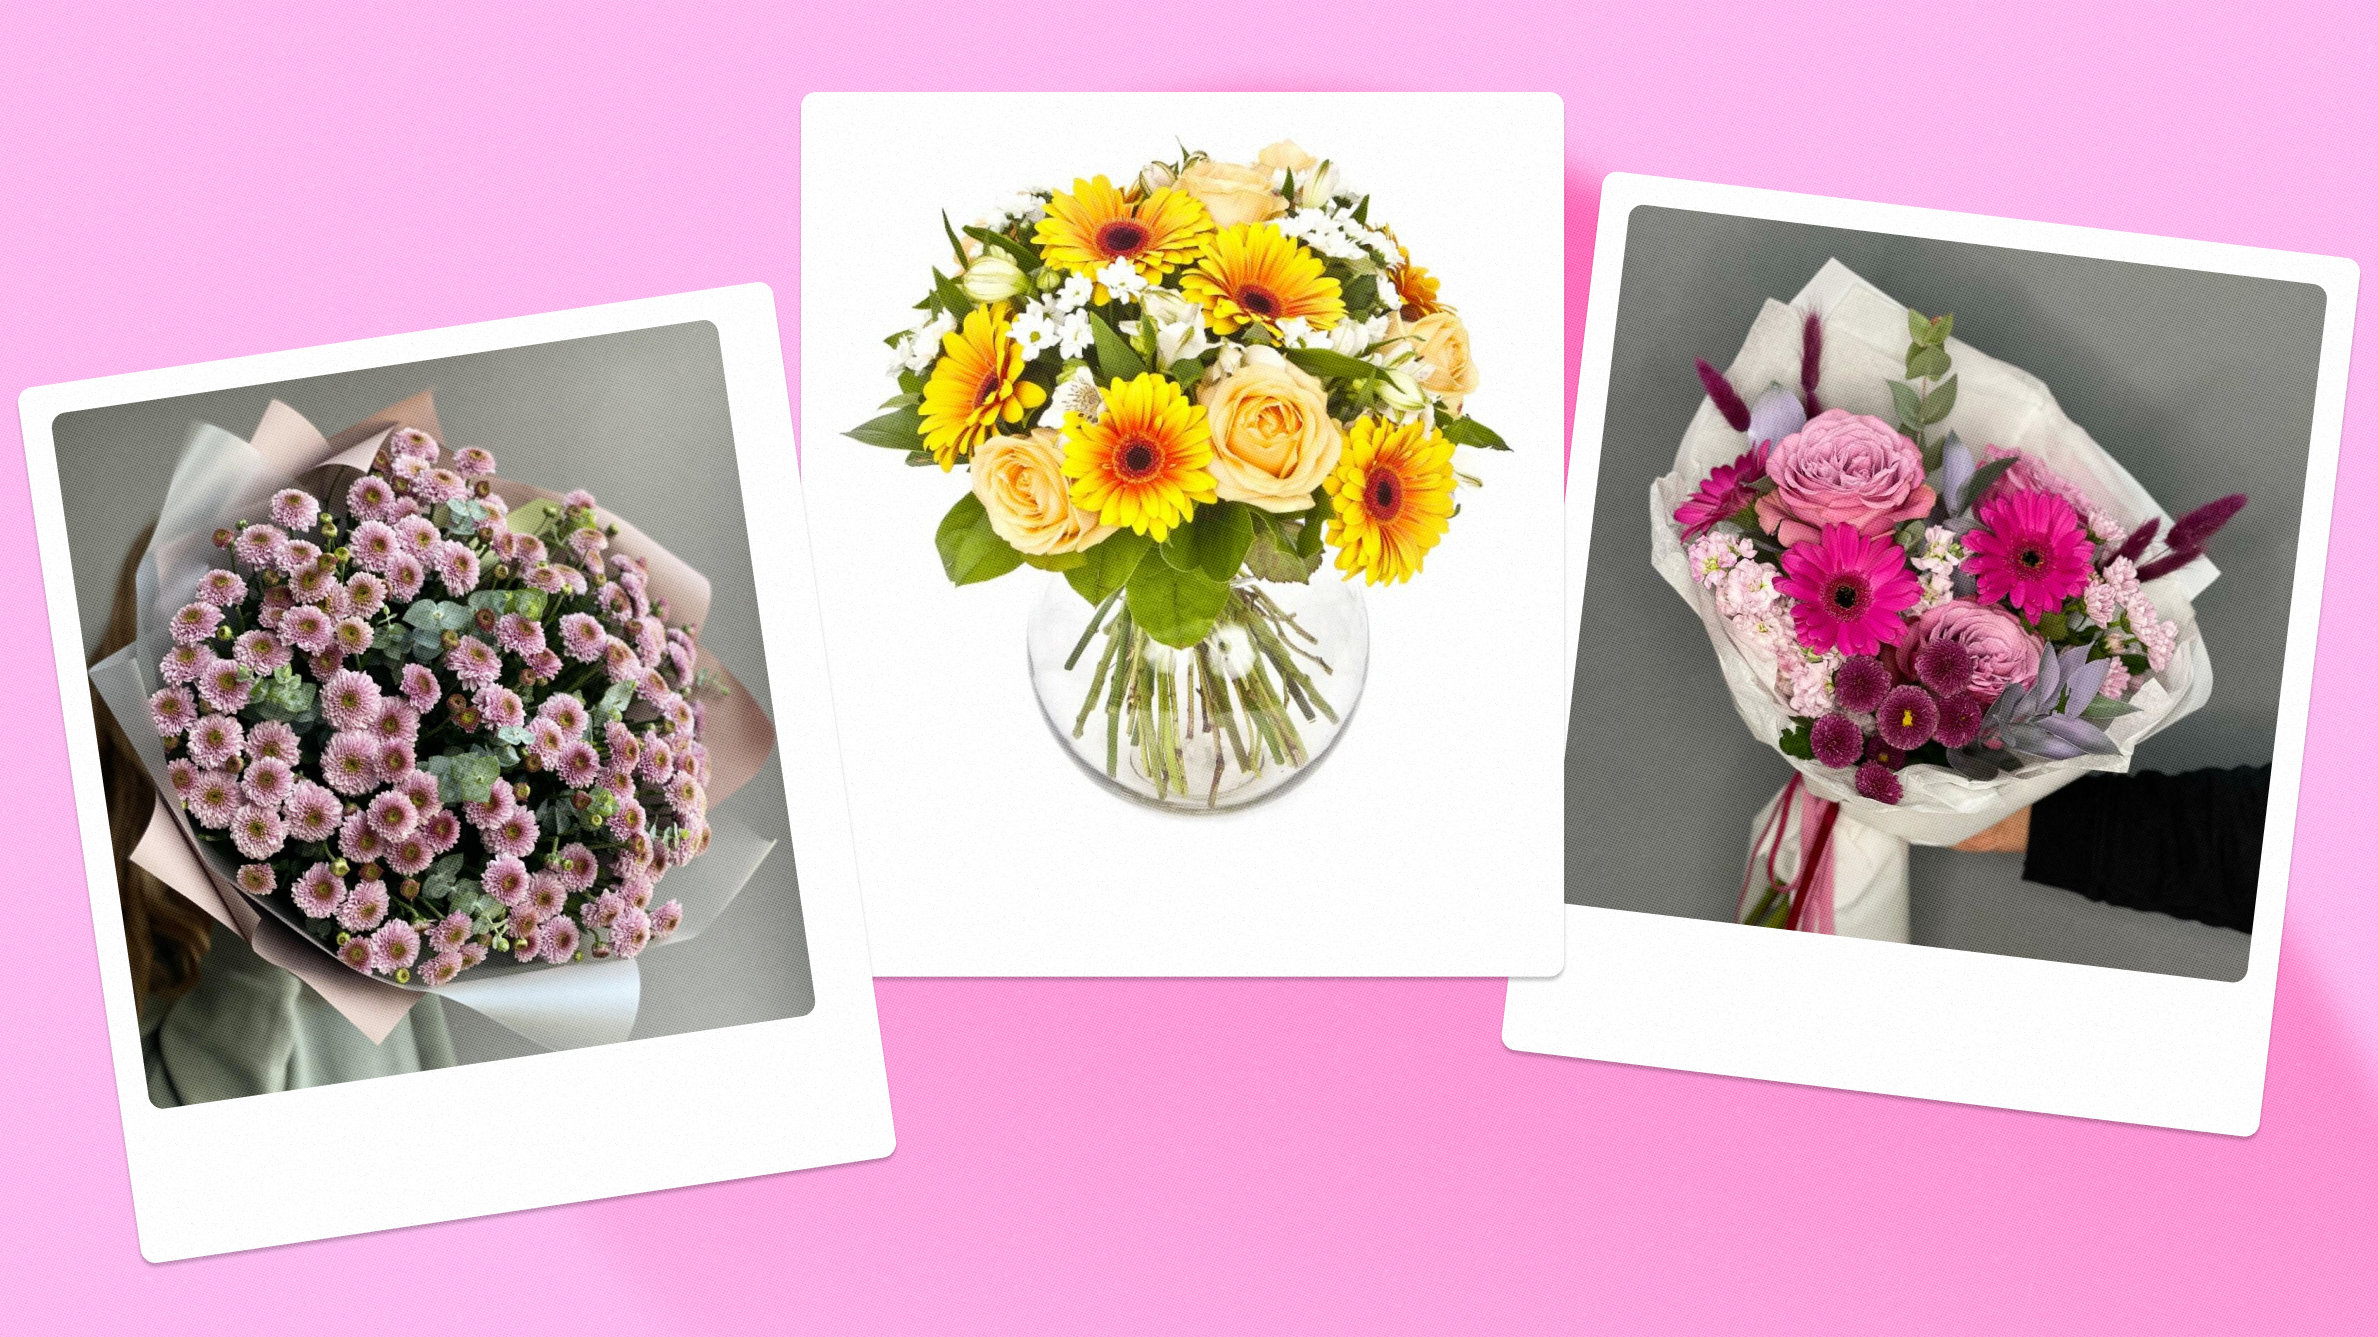 When to give chrysanthemum flowers